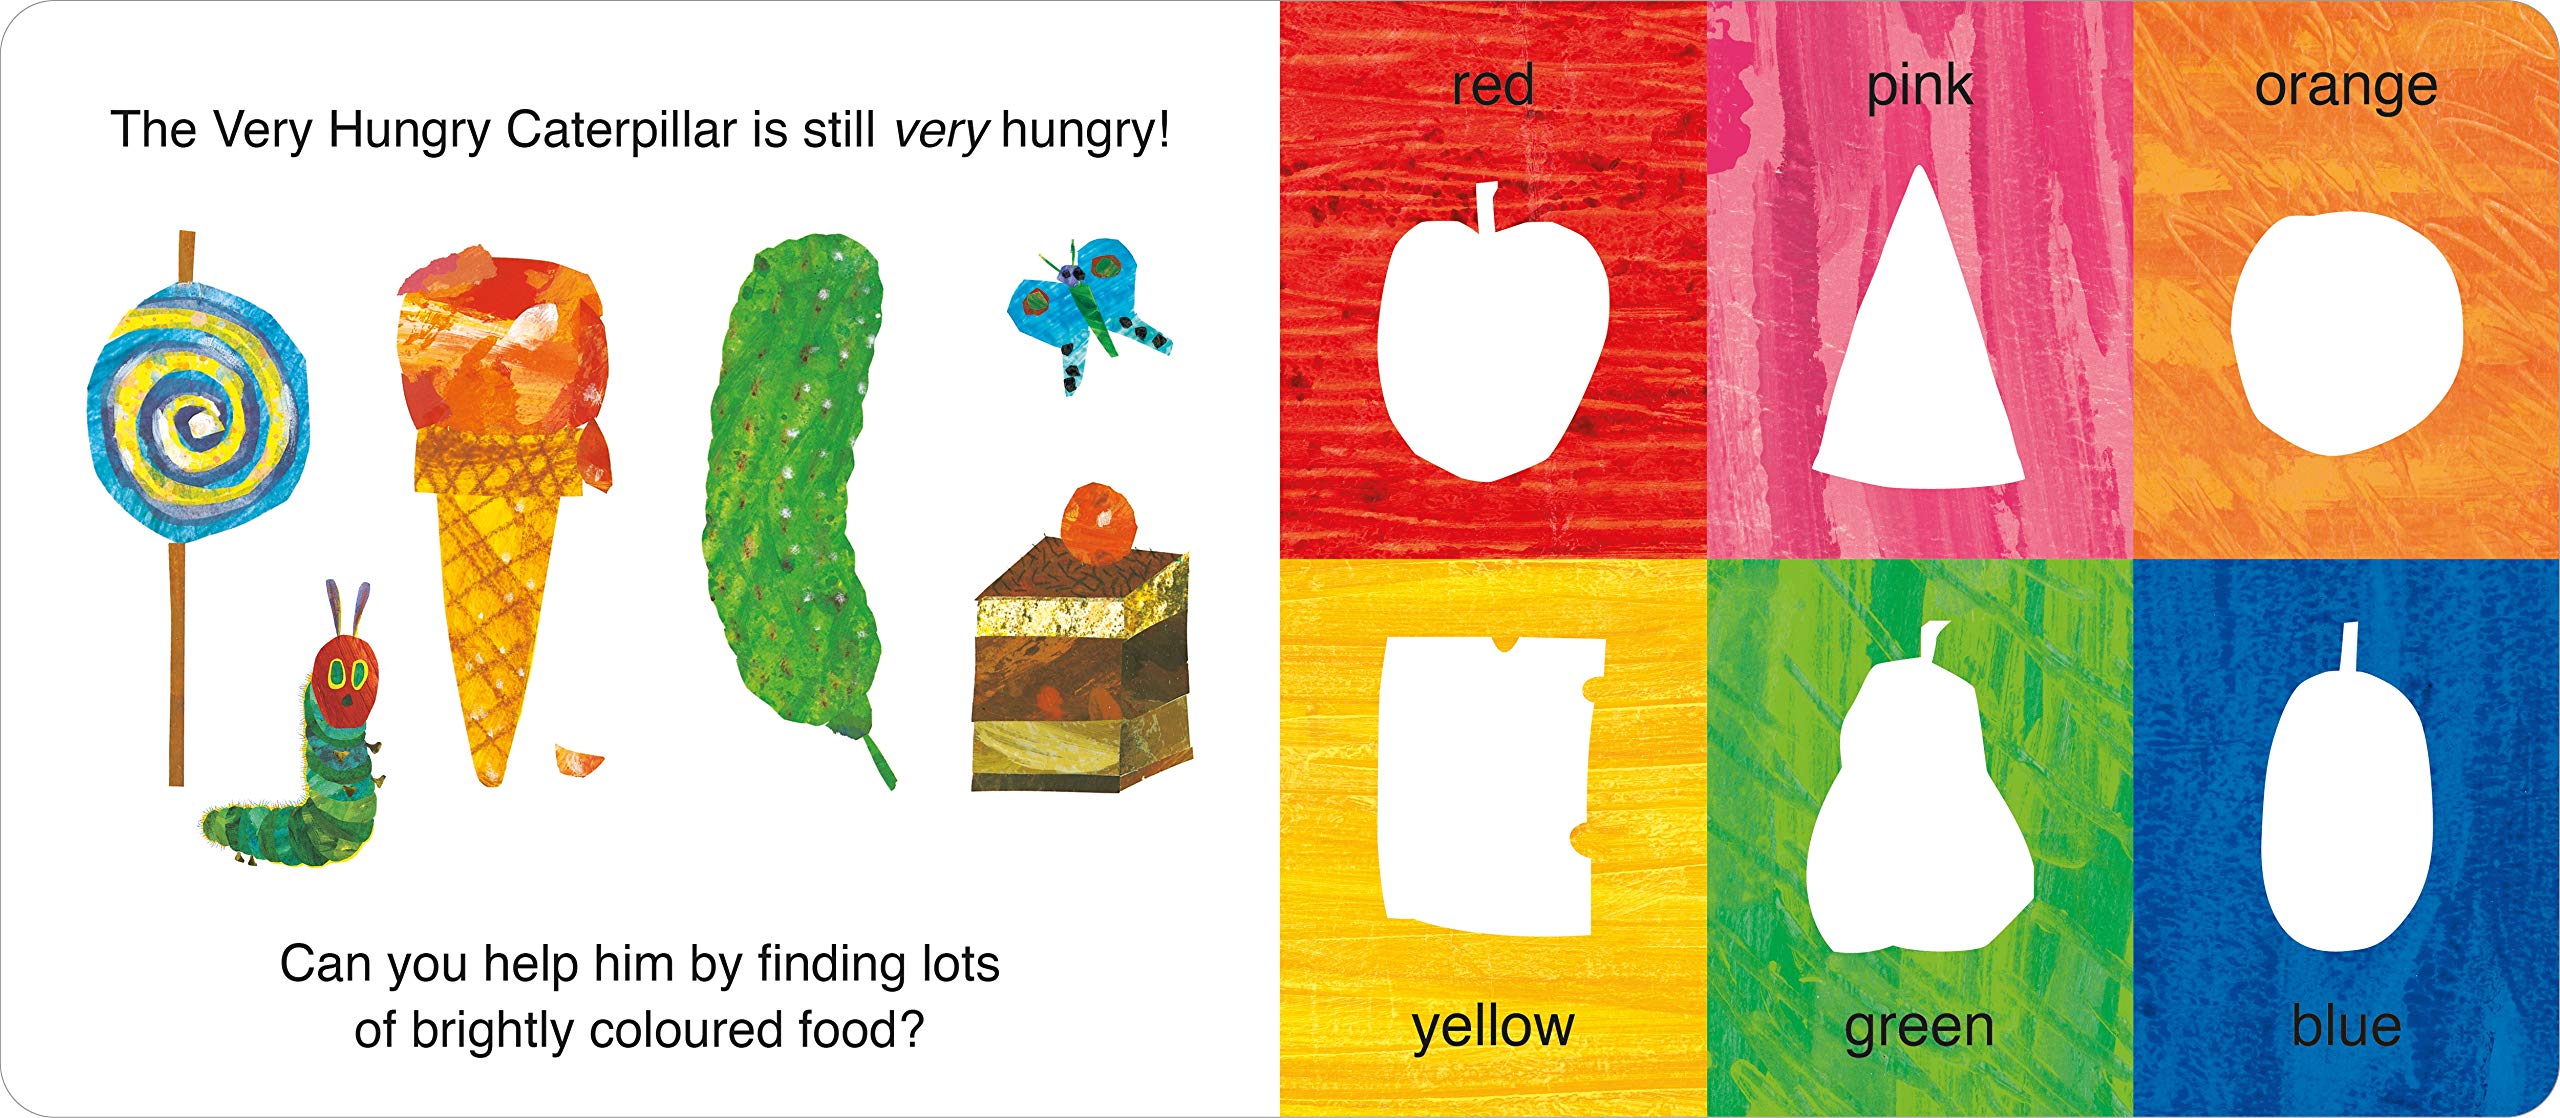 The Very Hungry Caterpillar&